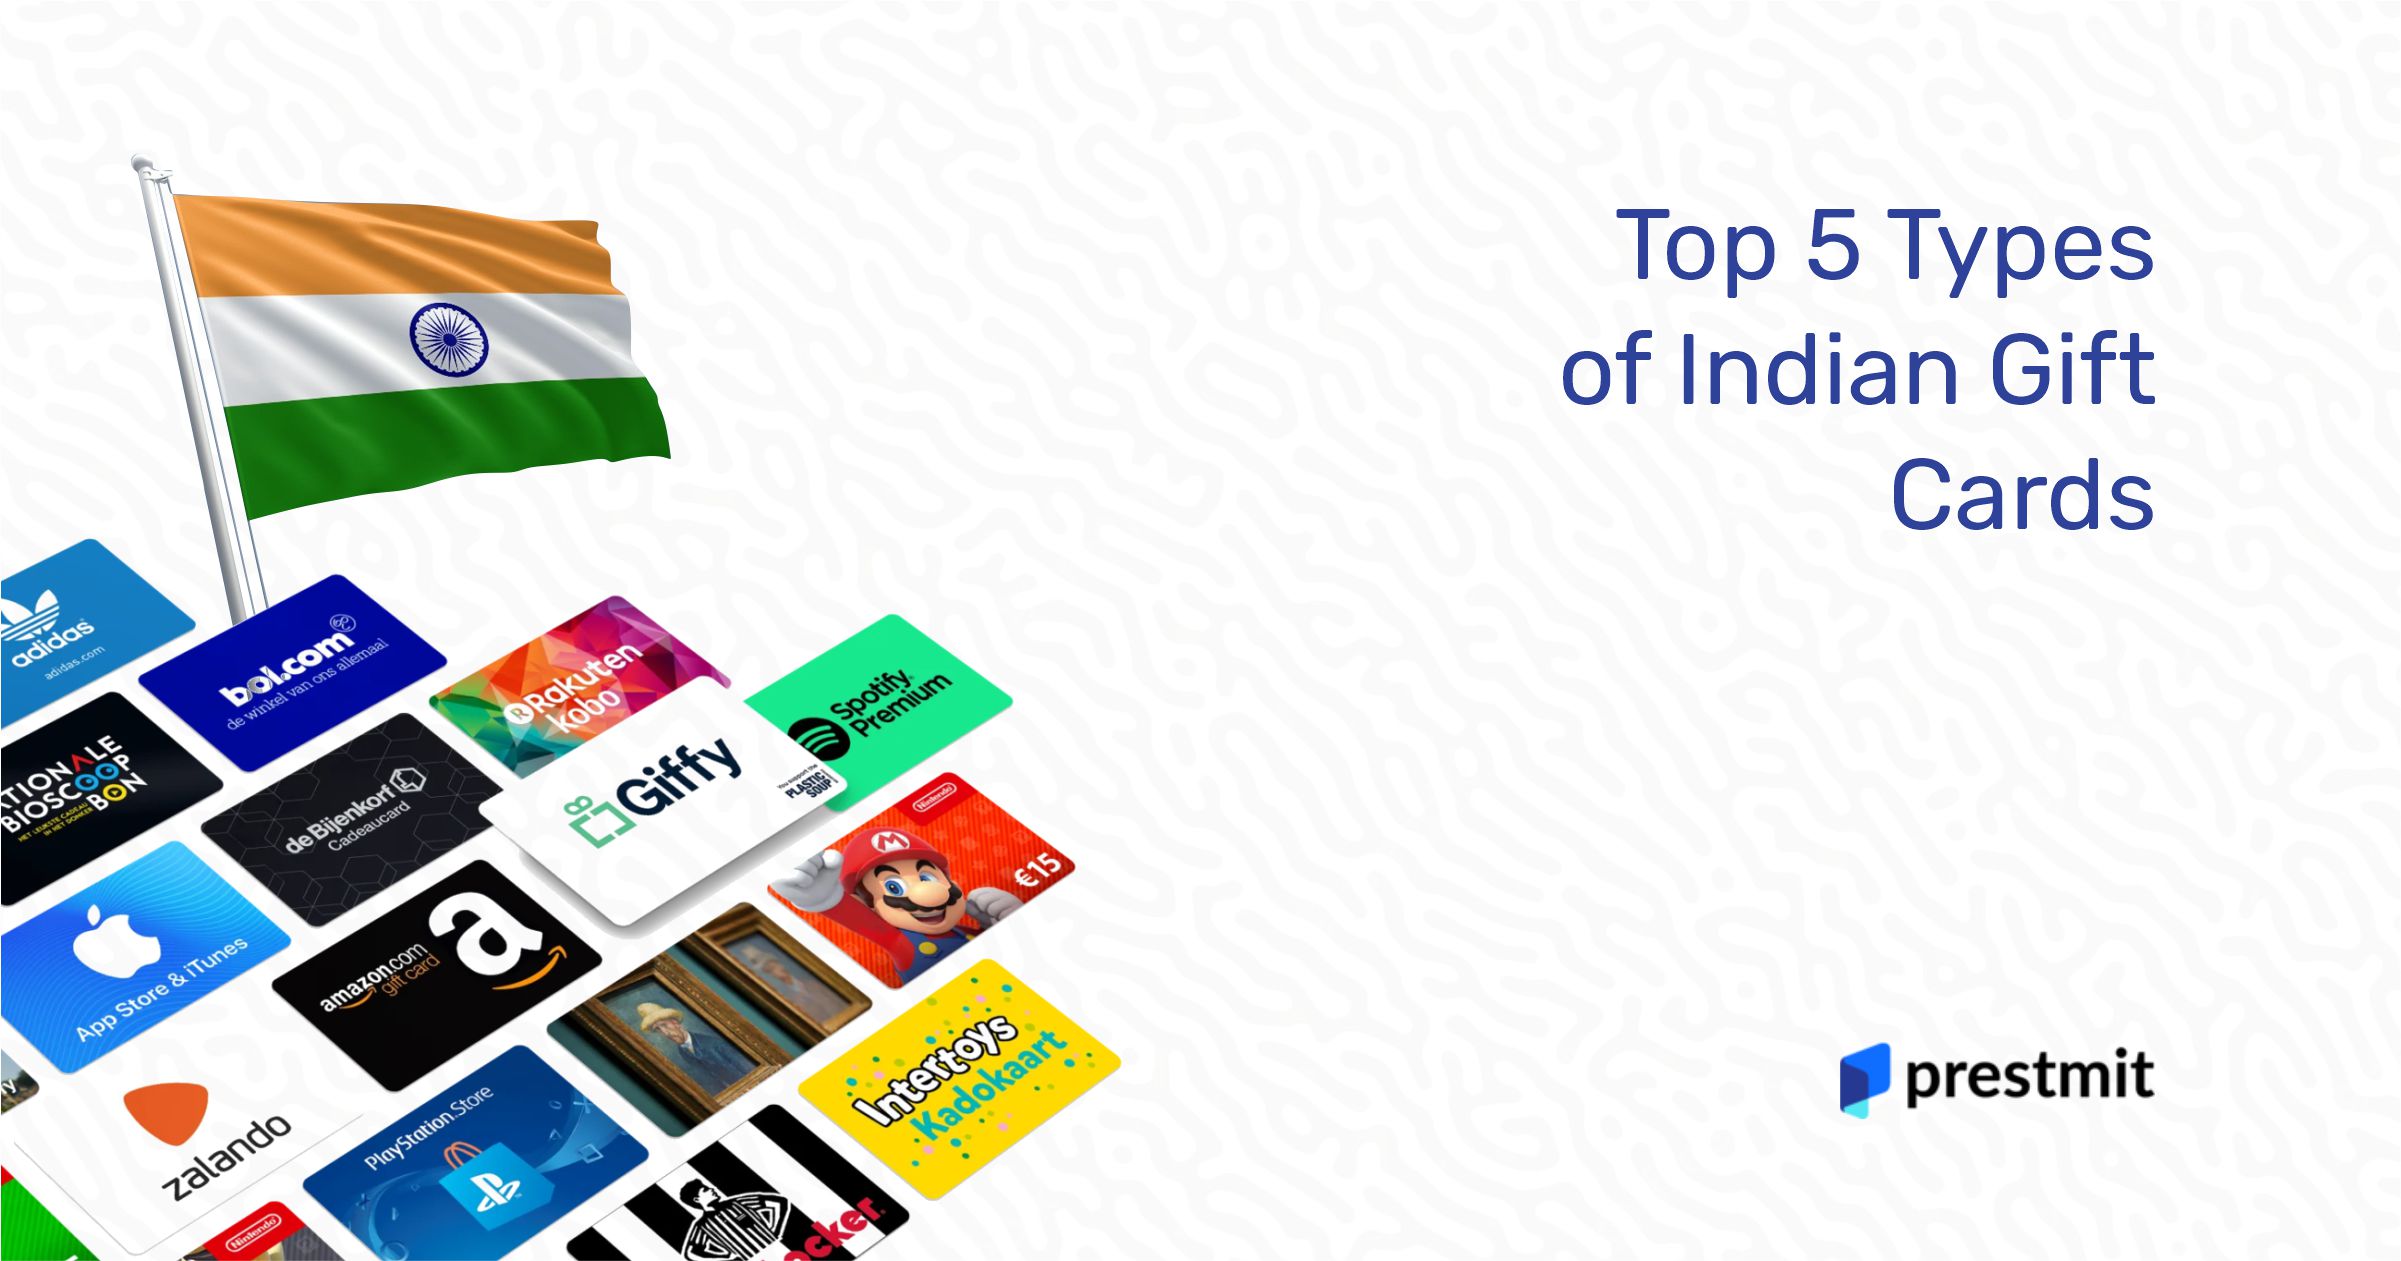 Top 5 Types Of Indian Gift Cards - Popular Gift Cards In India